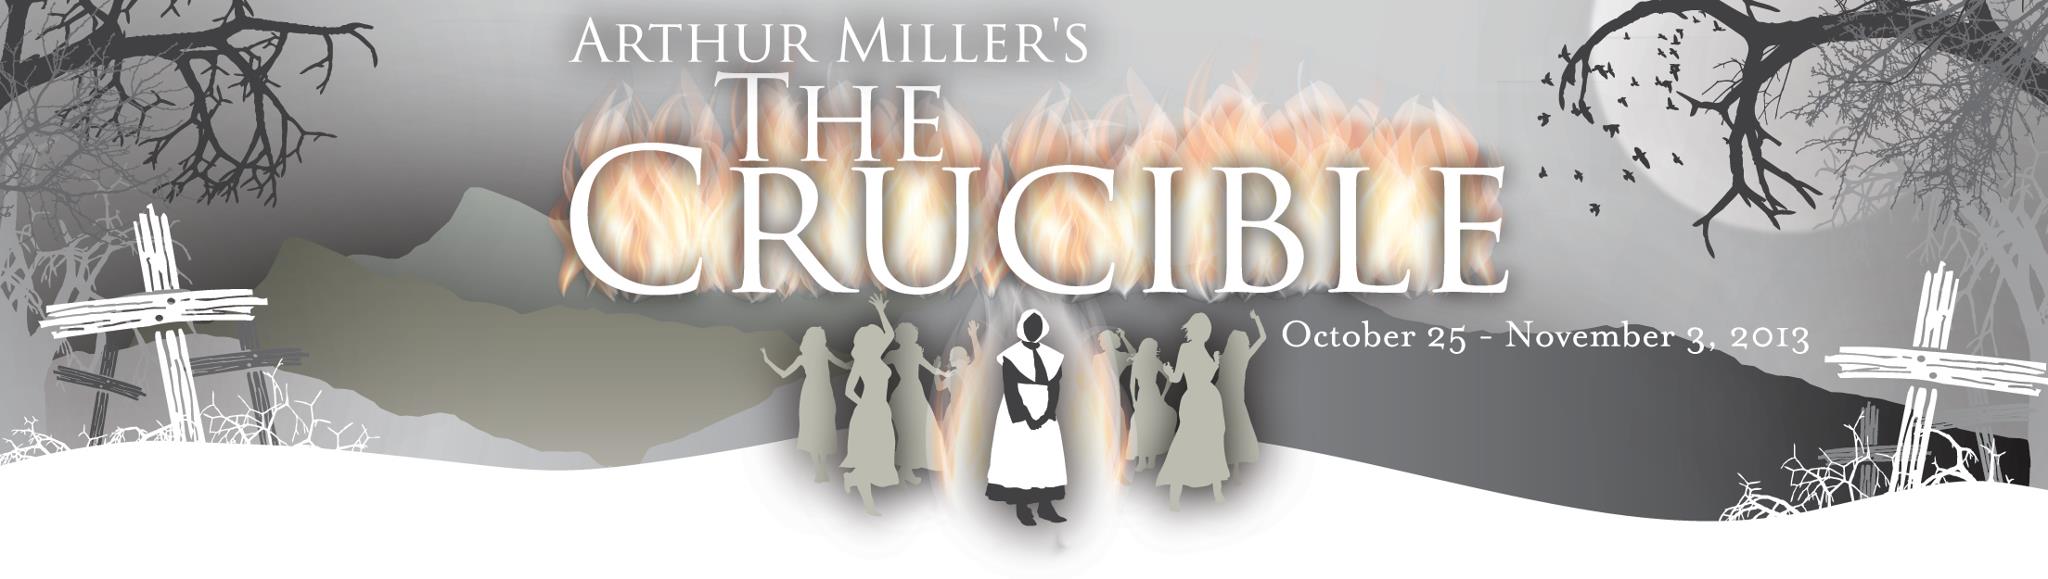 Theater poster for Arthur Miller's The Crucible, Oct. 25- Nov. 3, 2013. Image shows a a drawing of a person in a dress, bonnet and apron in a graveyard.